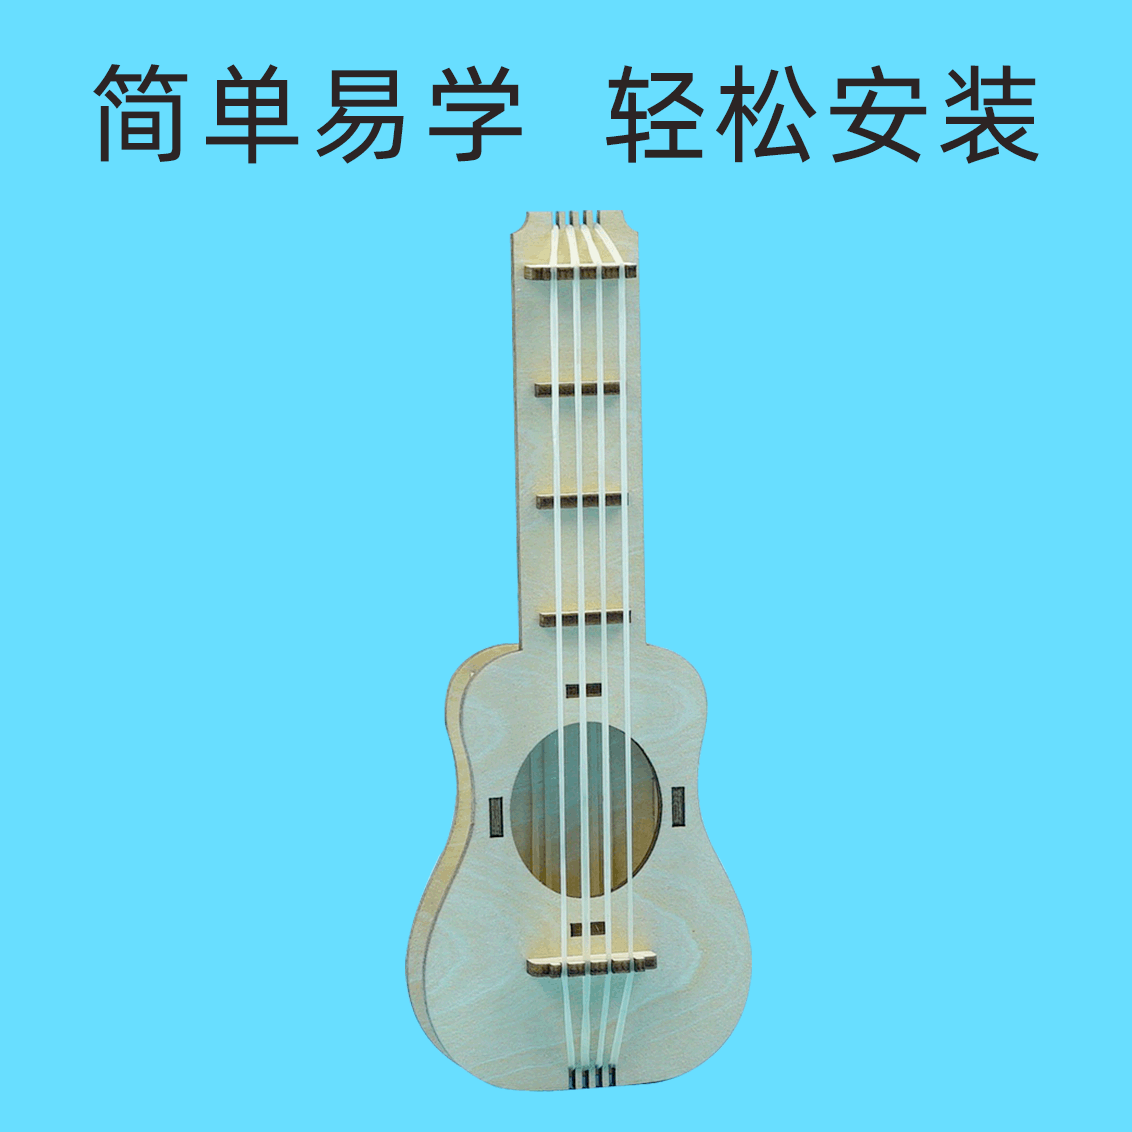 Children's science and technology small production diy rubber band guitar handmade homemade ukulele science experiment gizmos materials